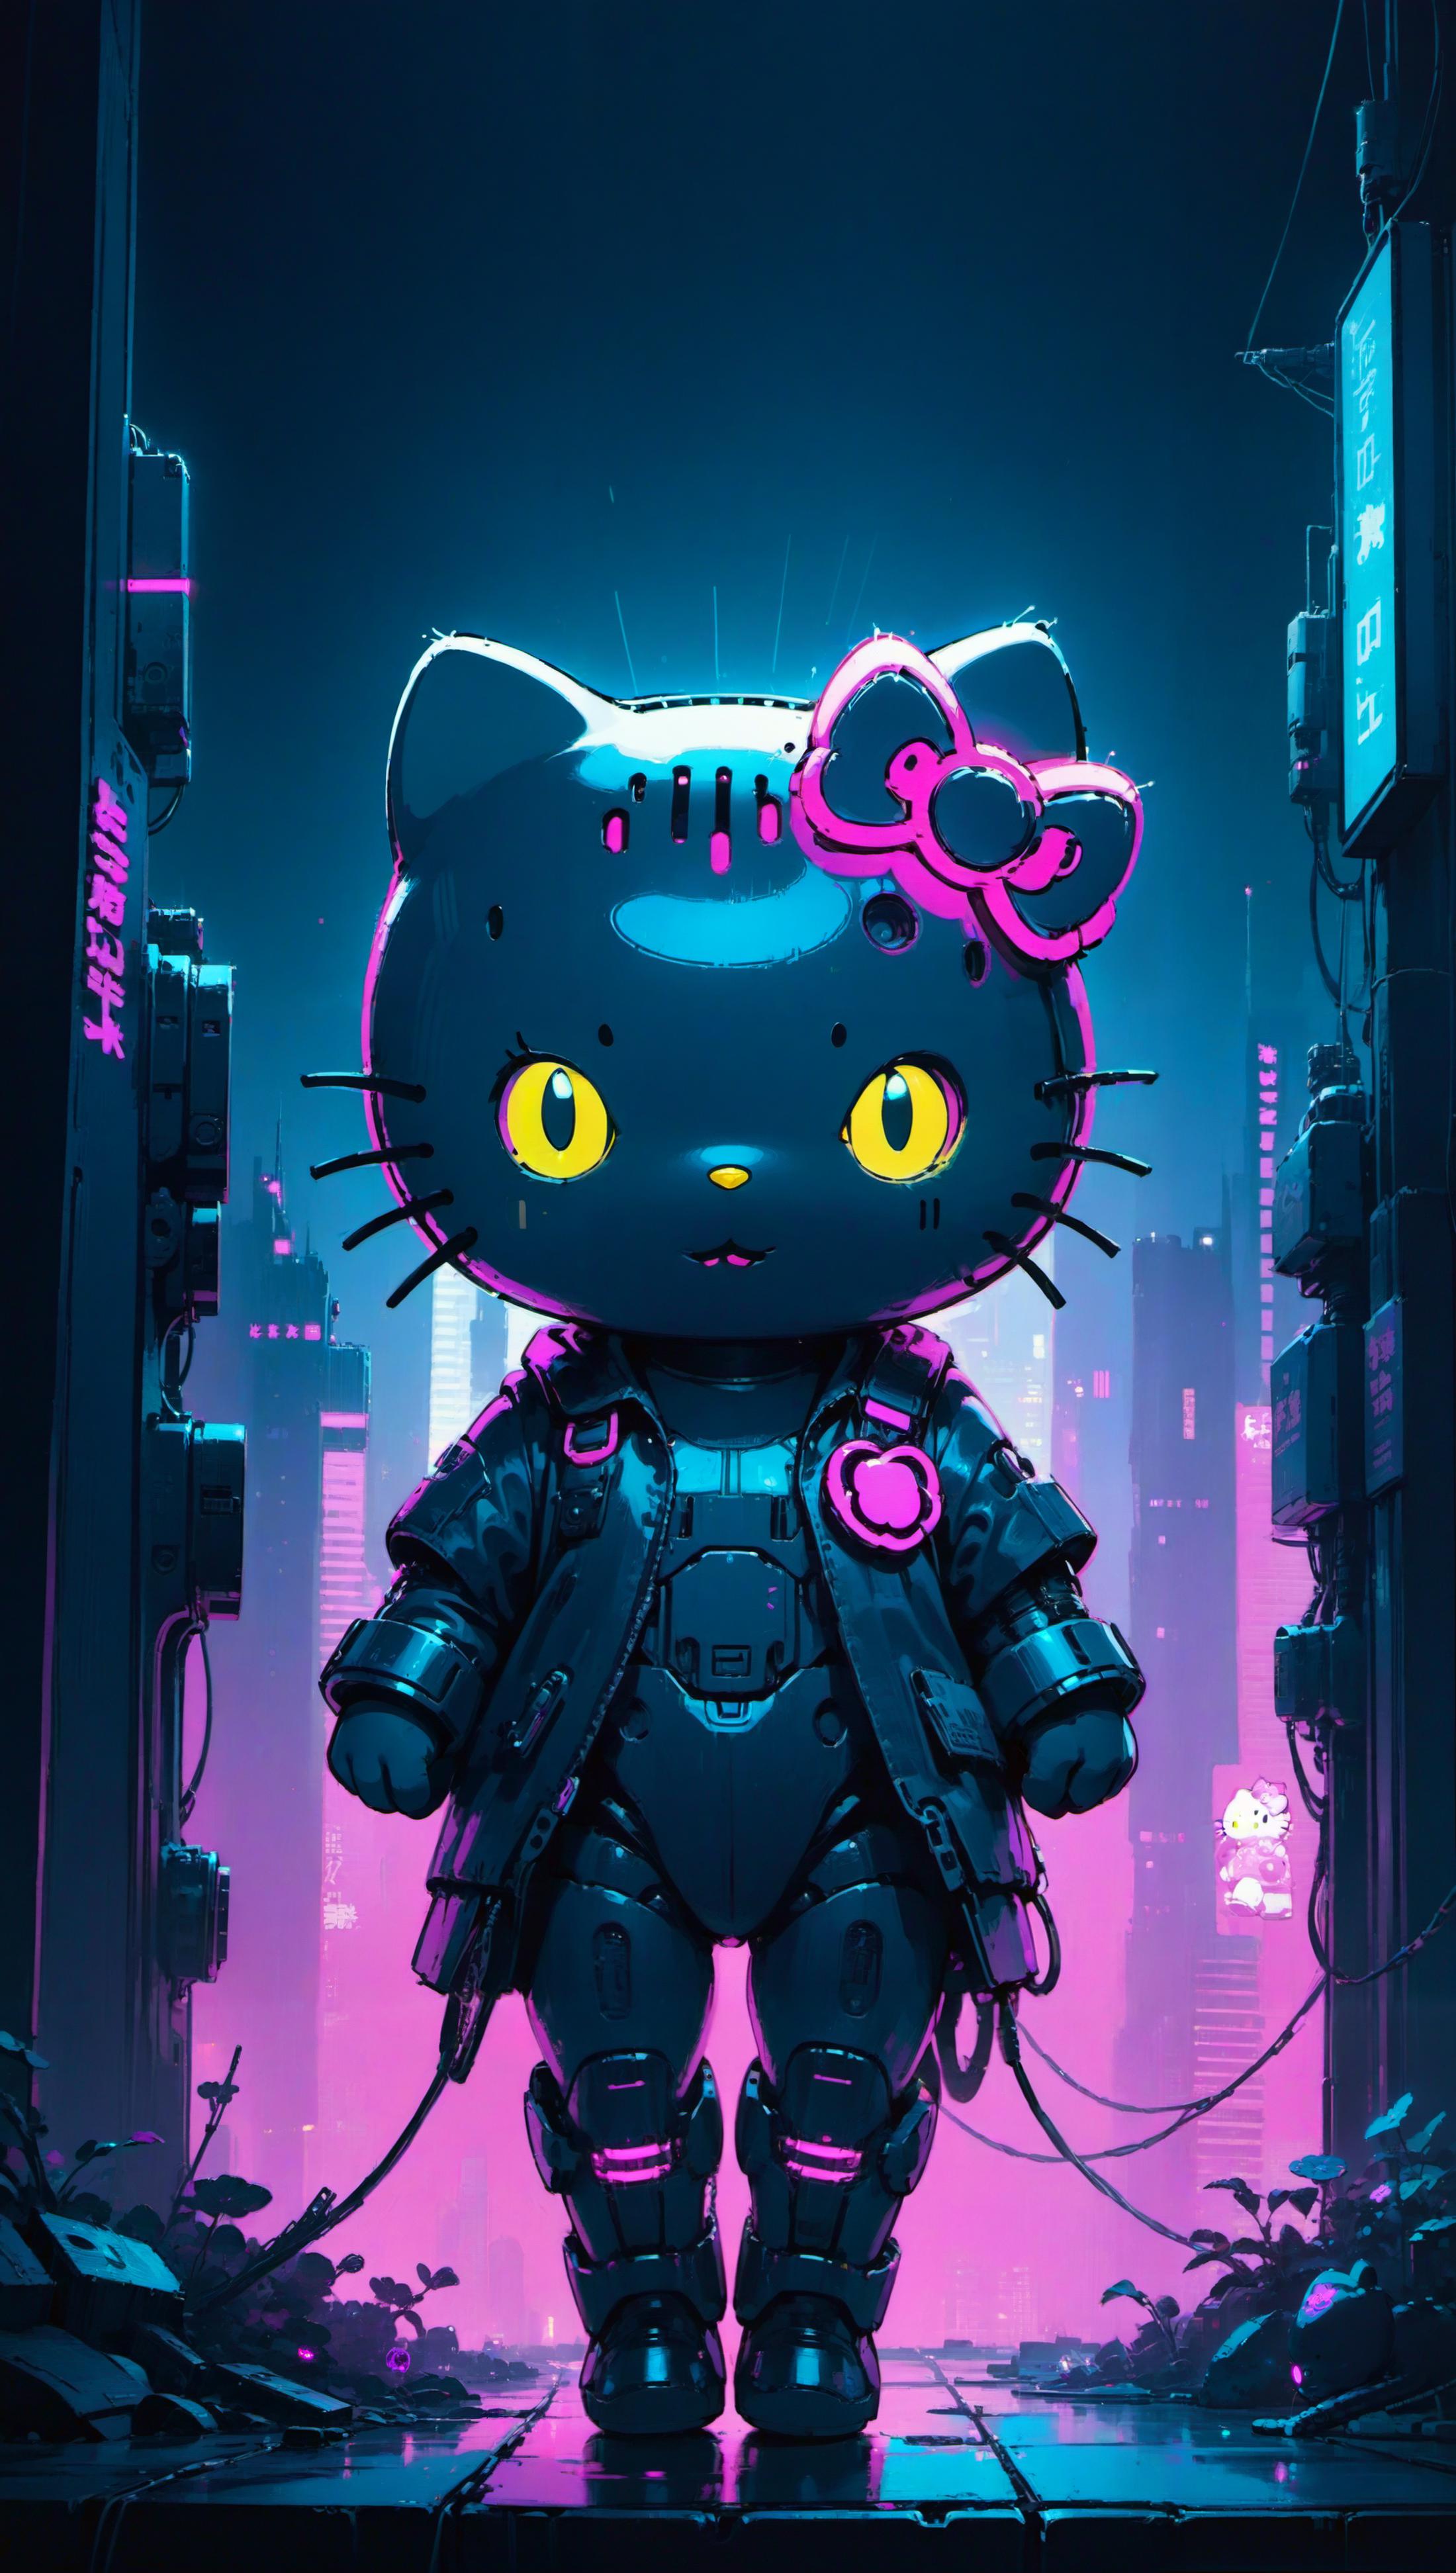 A Hello Kitty figurine wearing a black leather jacket and holding a weapon.